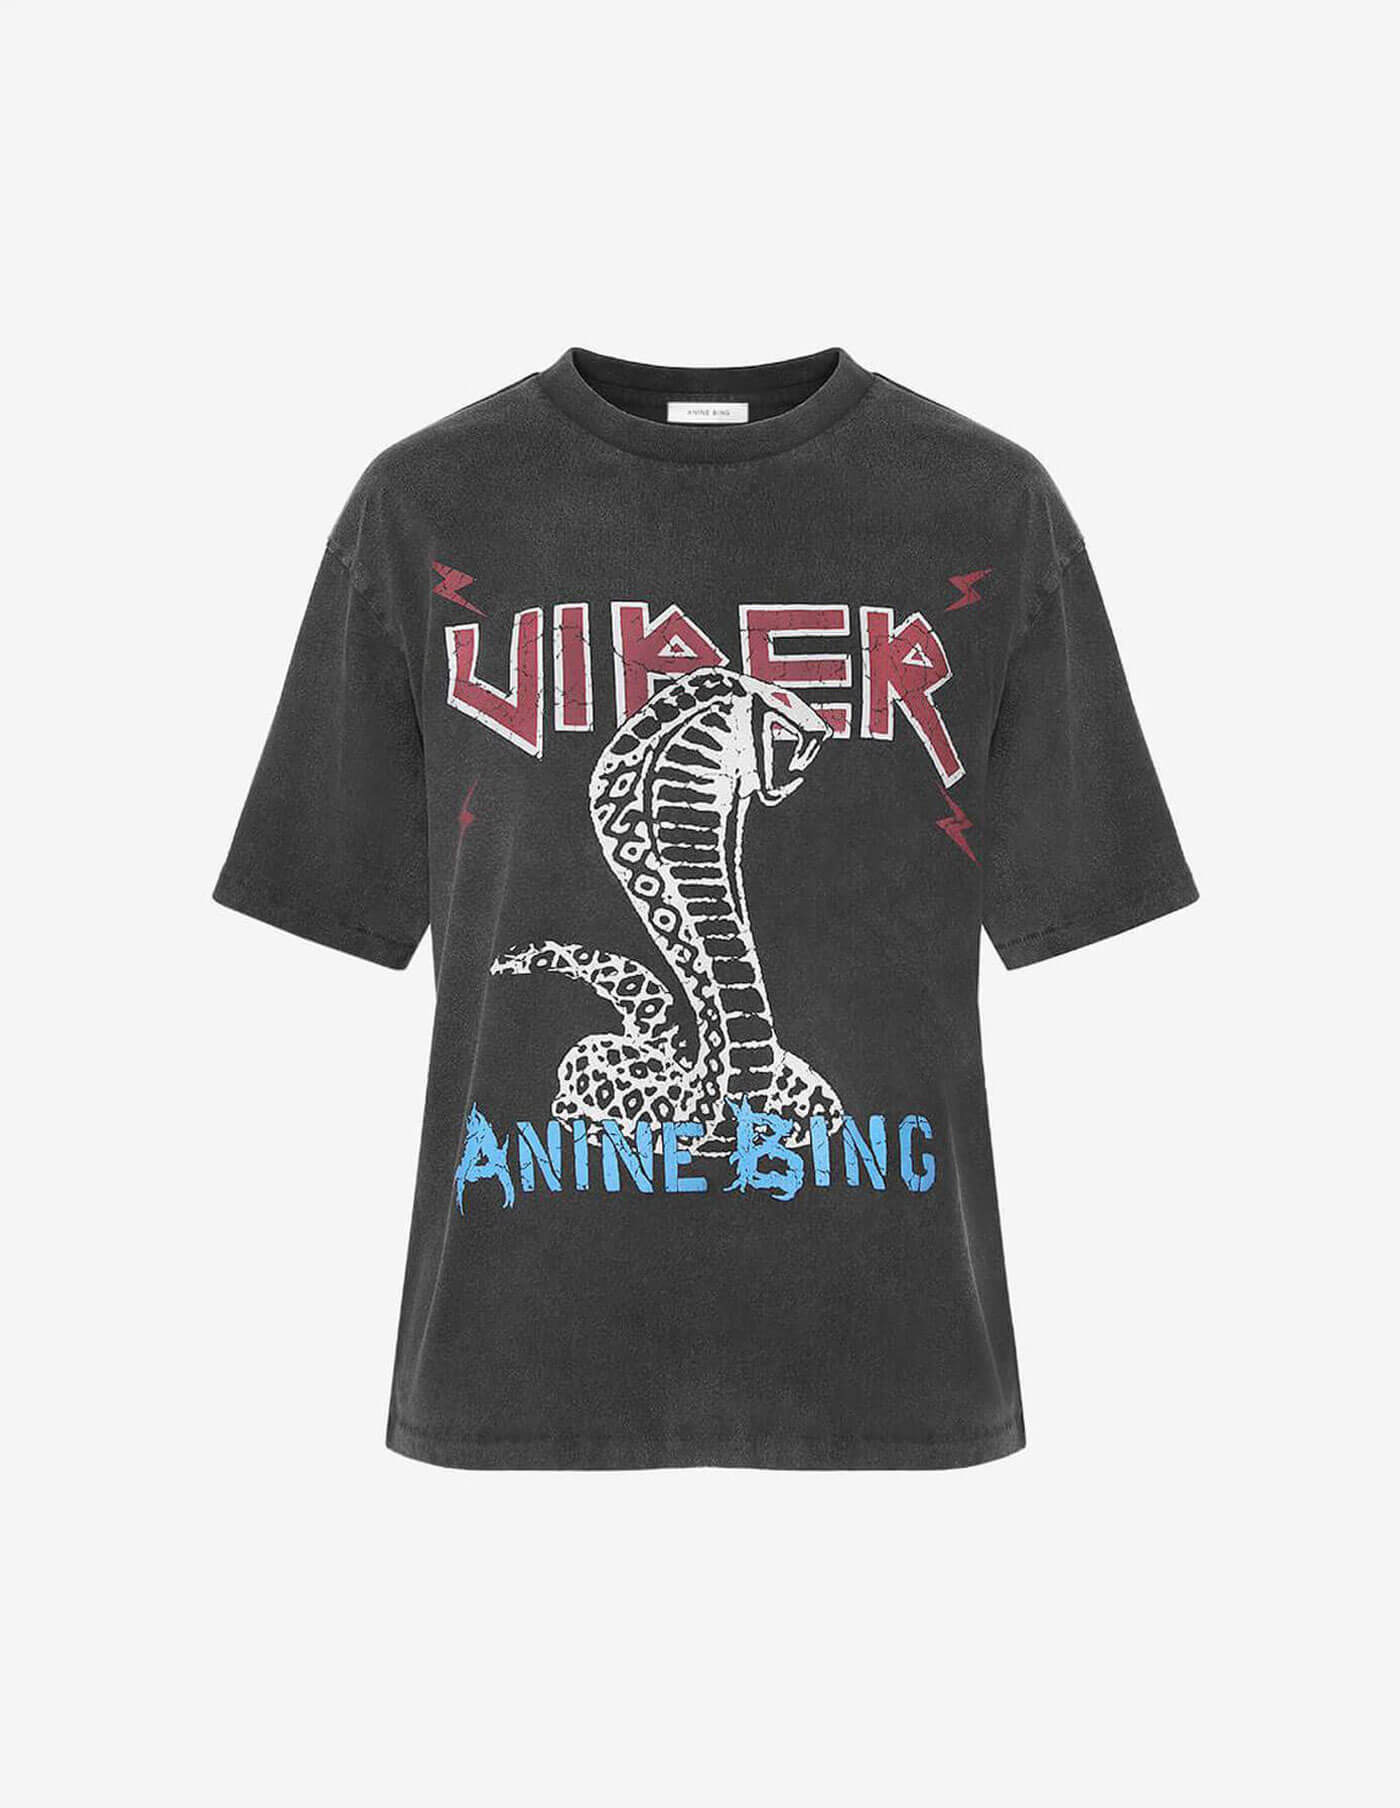 Anine Bing Serpent T-shirt In Black at Storm Fashion